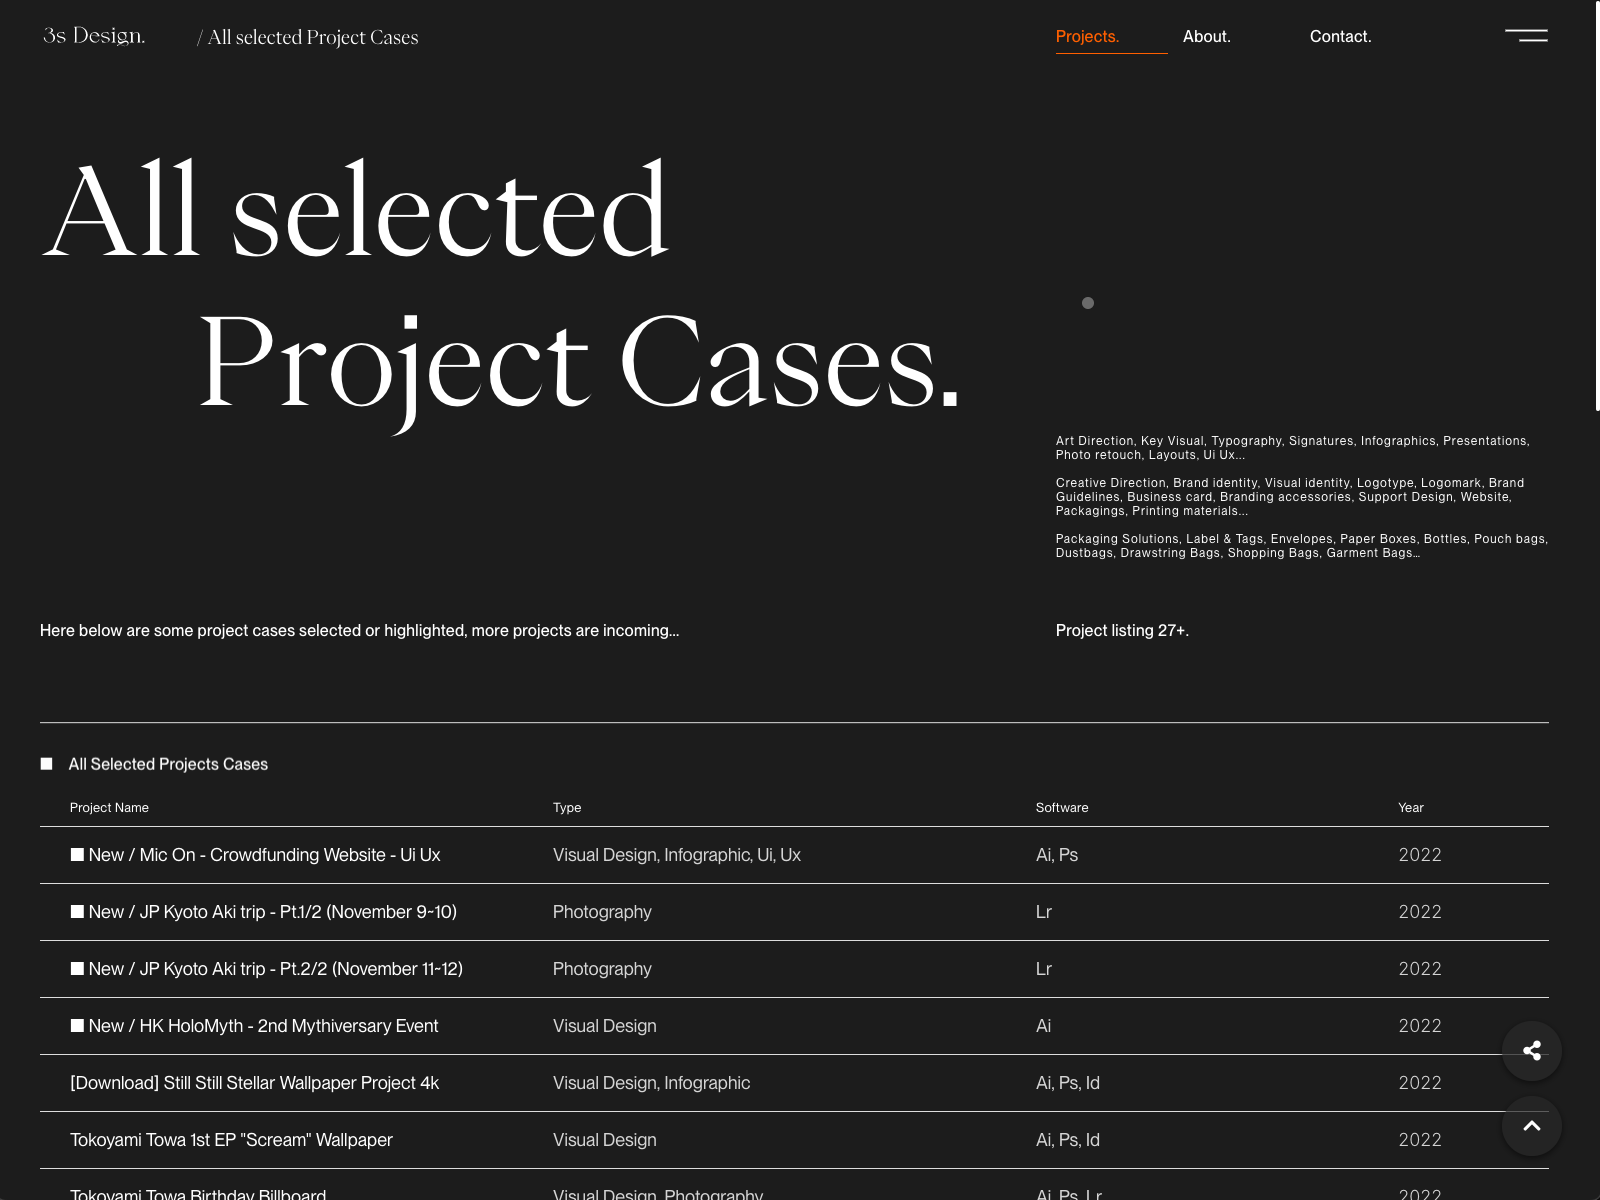 Project type page